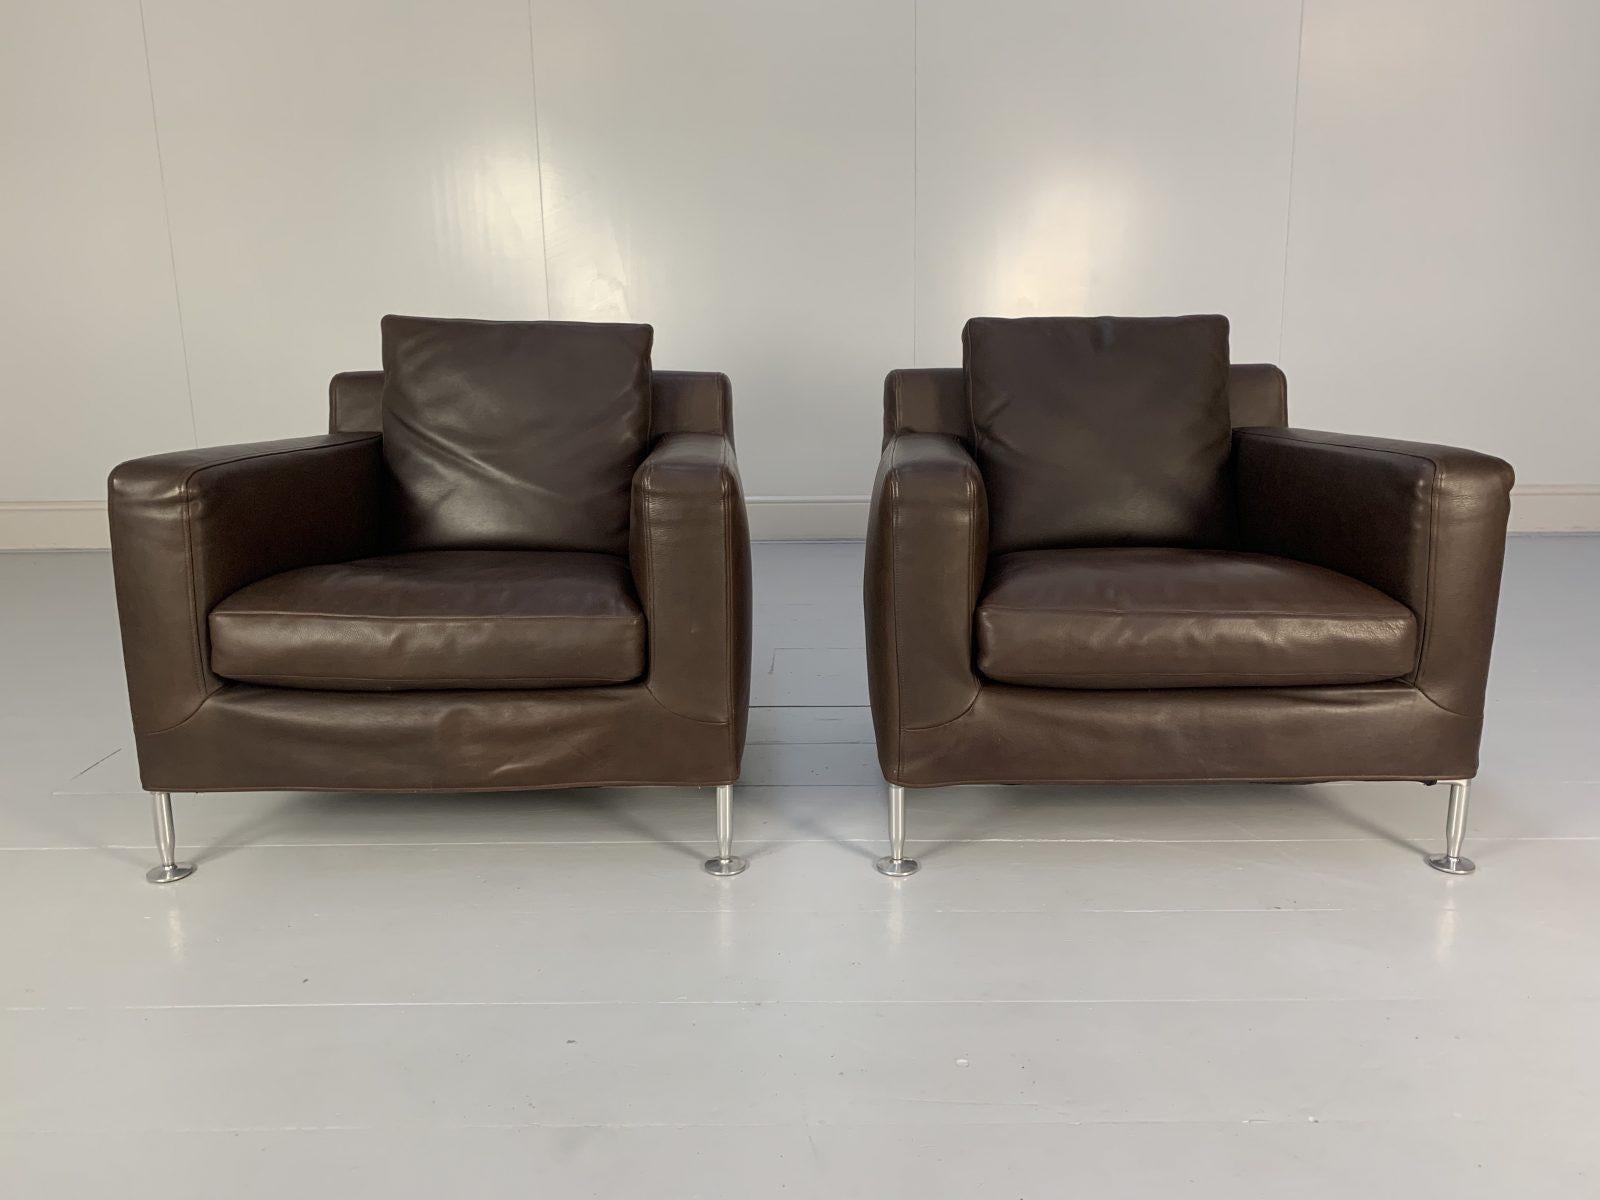 This is a rare, impeccable identical pair of “Harry H85” Armchairs from the world renown Italian furniture house, B&B Italia.

In a world of temporary pleasures, B&B Italia create beautiful furniture that remains a joy forever.

Dressed in the